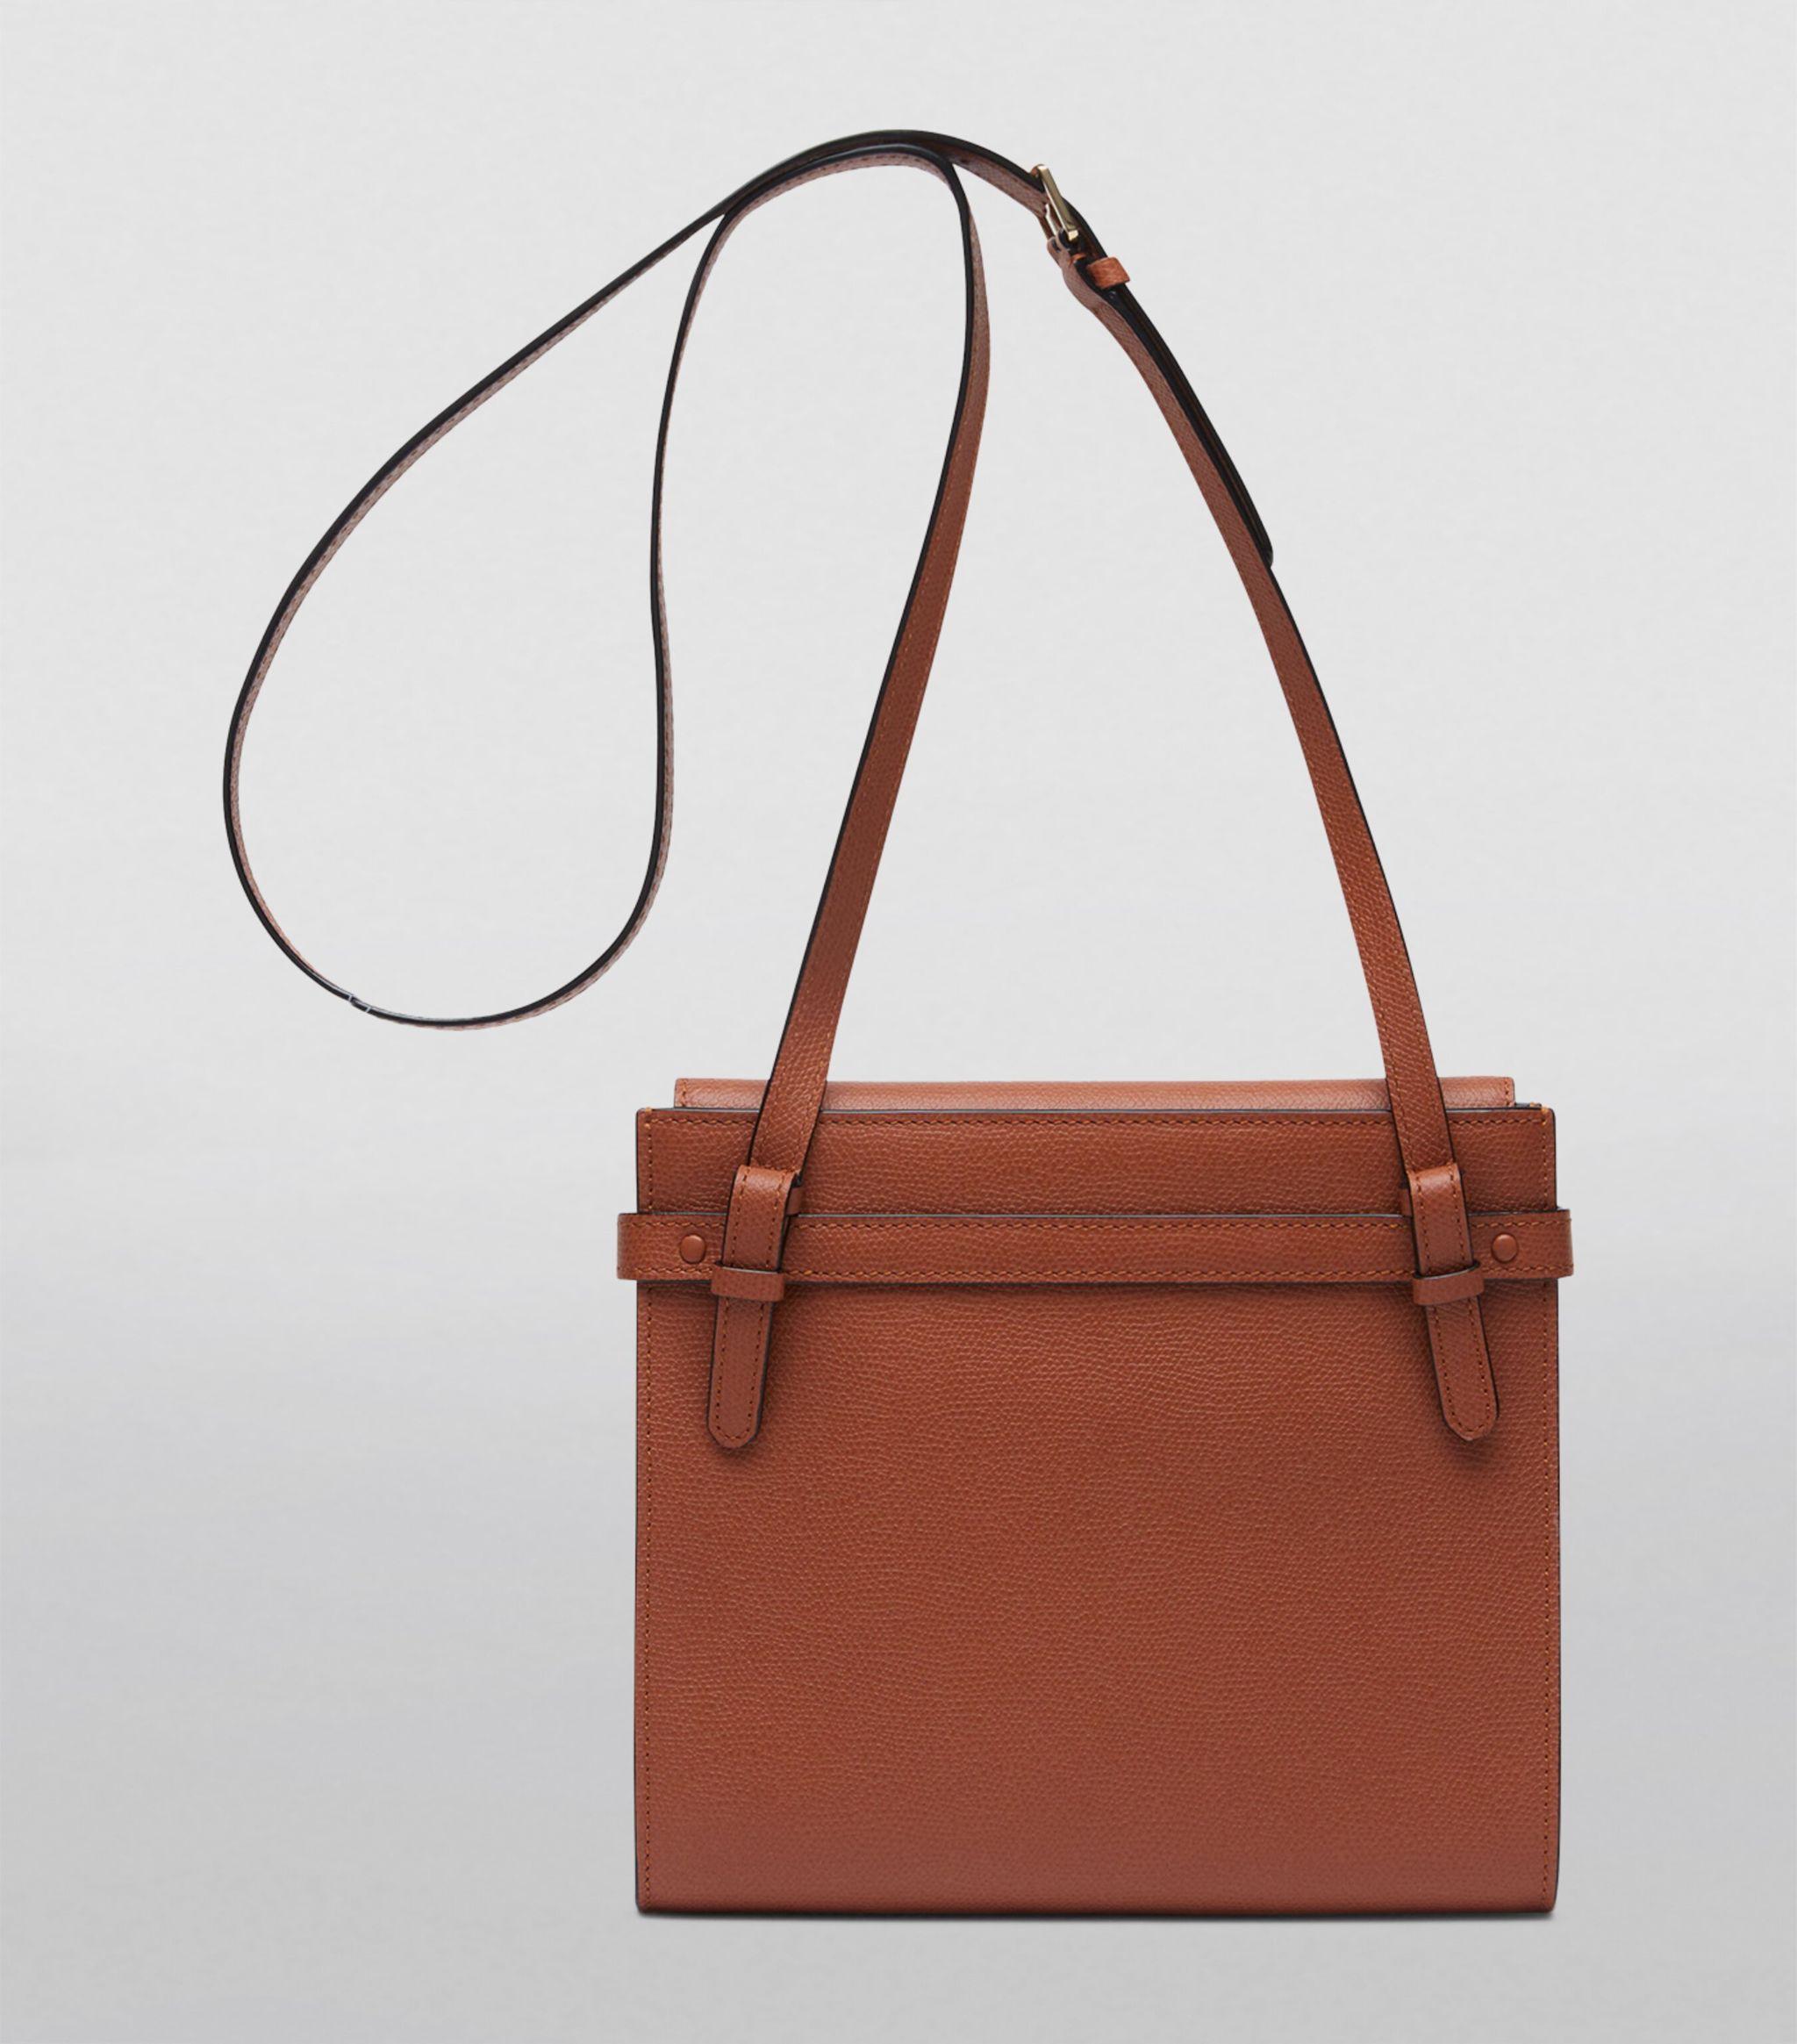 Valextra Leather Brera B-tracollina Cross-body Bag in Brown | Lyst